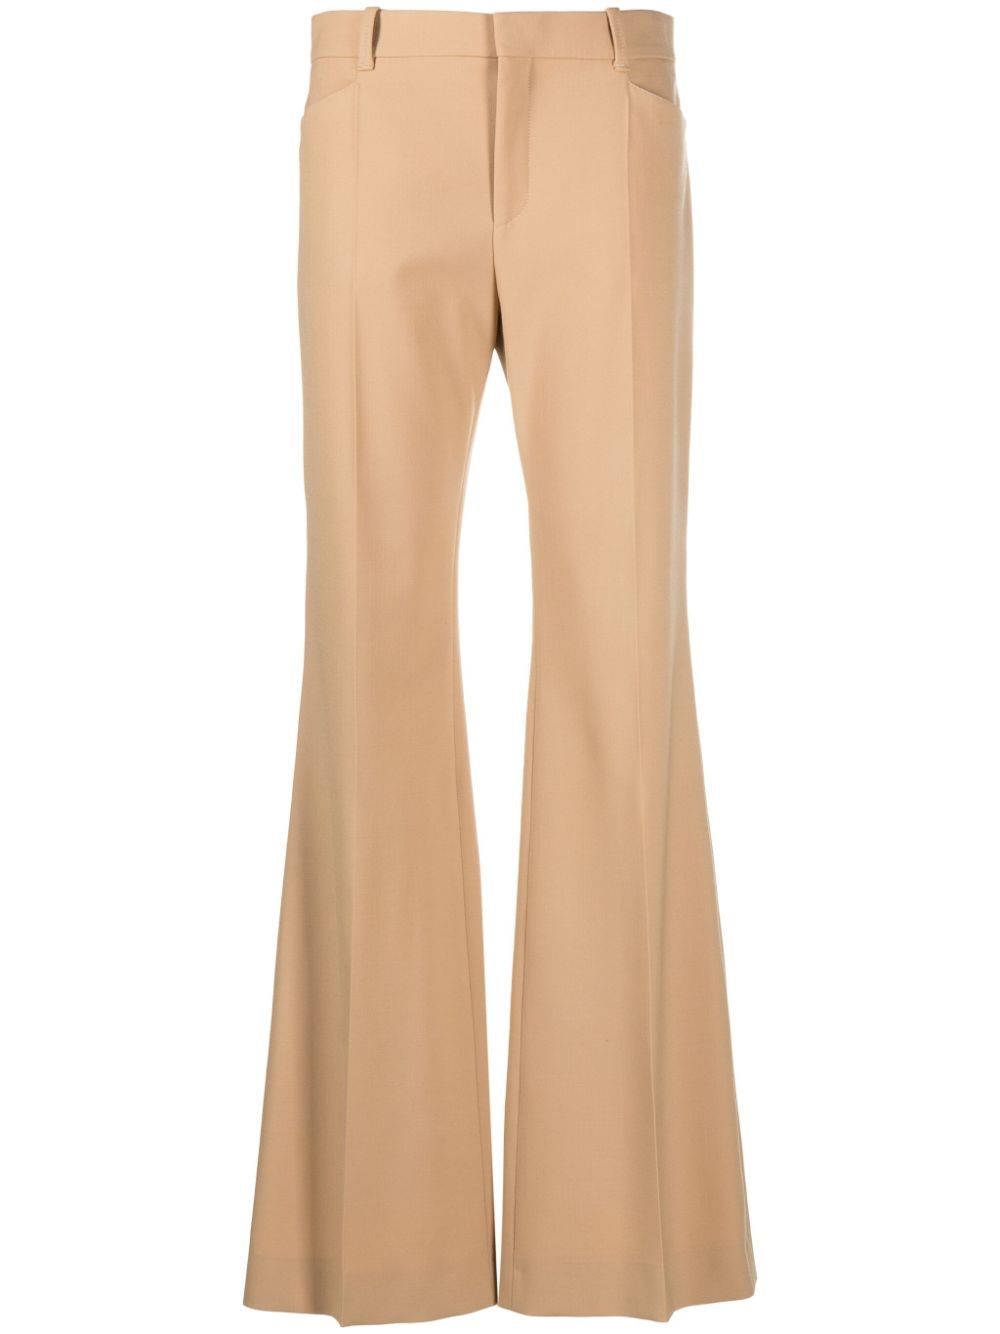 Pearlbeige Wool Blend Pants for Women - FW23 Collection